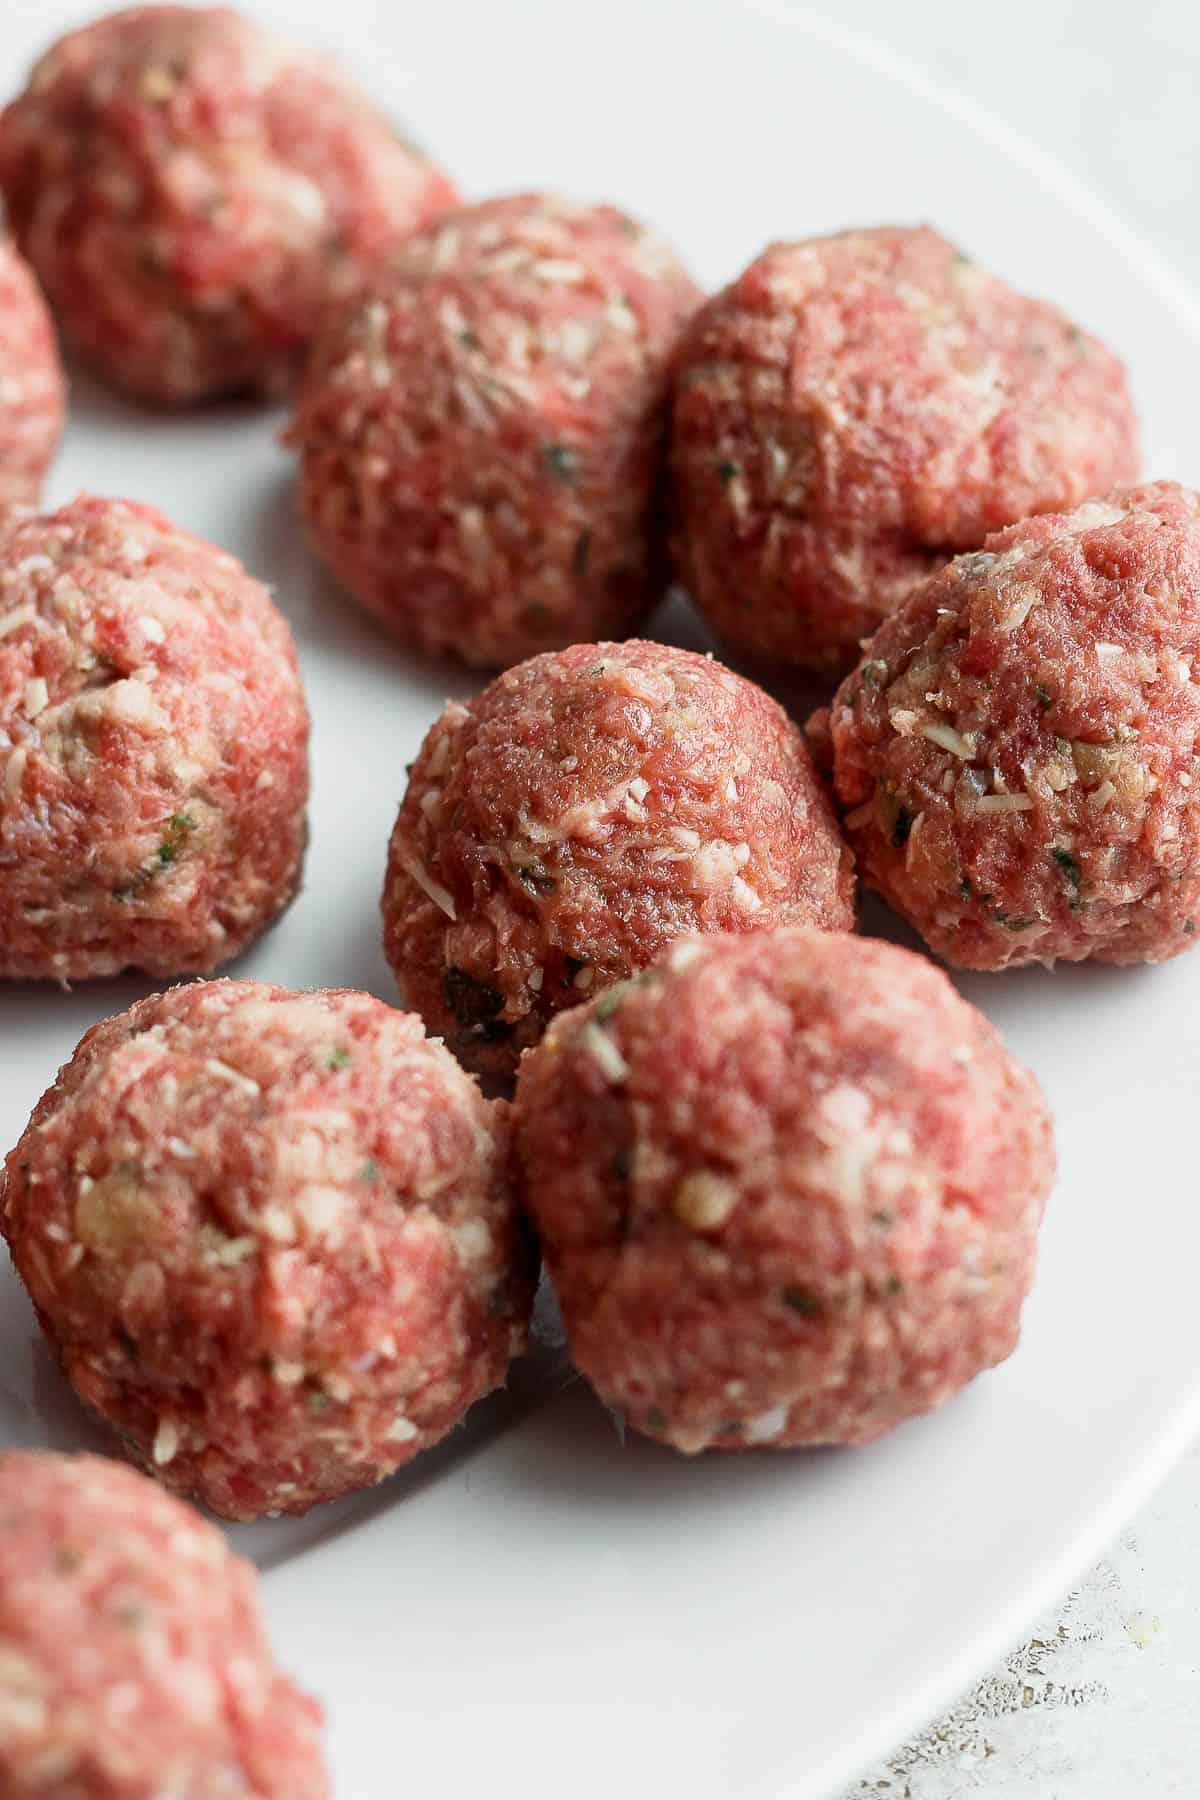 Rolled meatballs on a white plate before cooking.